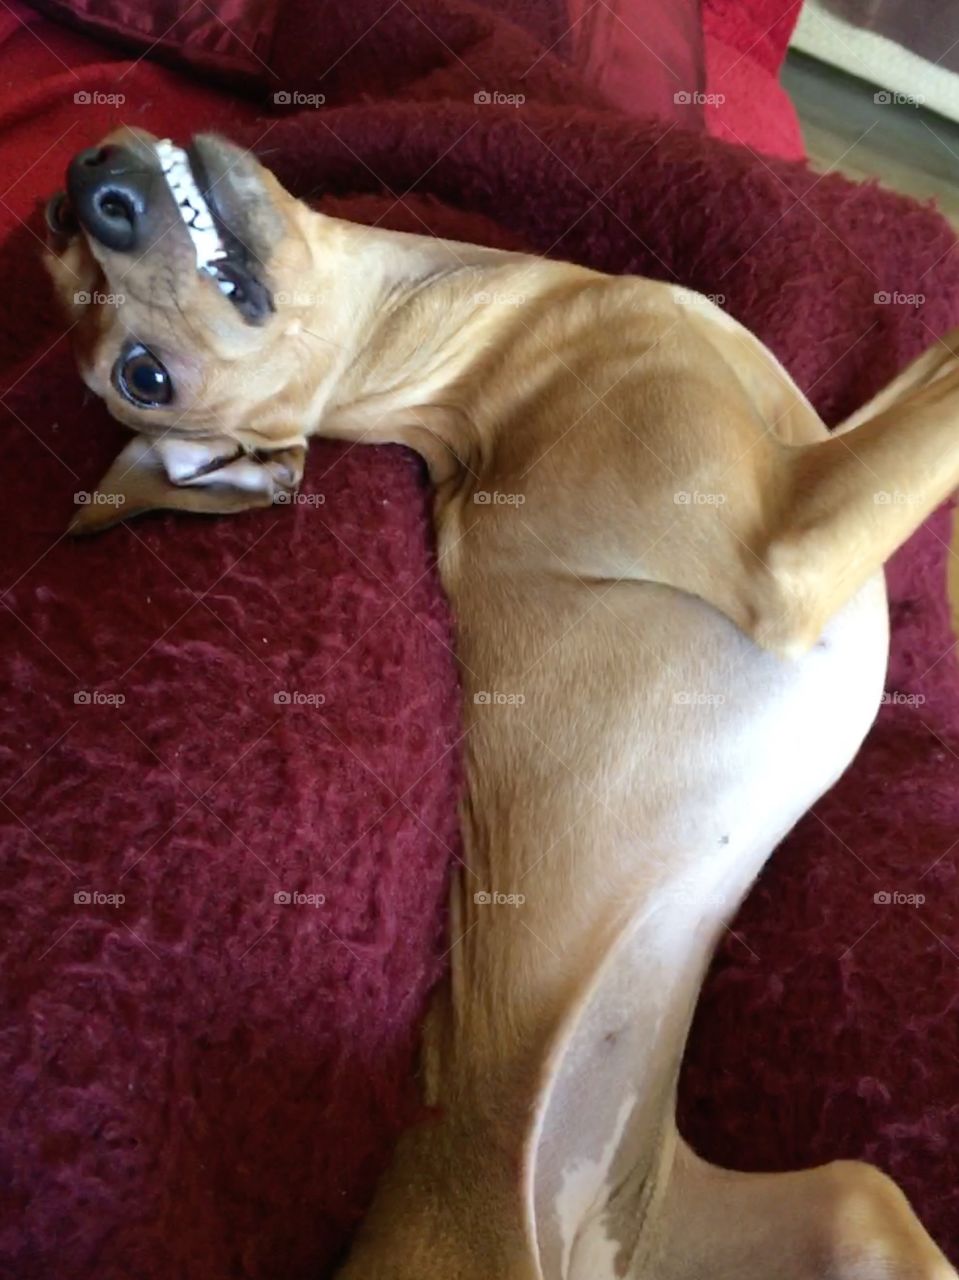 Amber the fawn Italian greyhound twisting while laid on her back and smiling a toothy grin